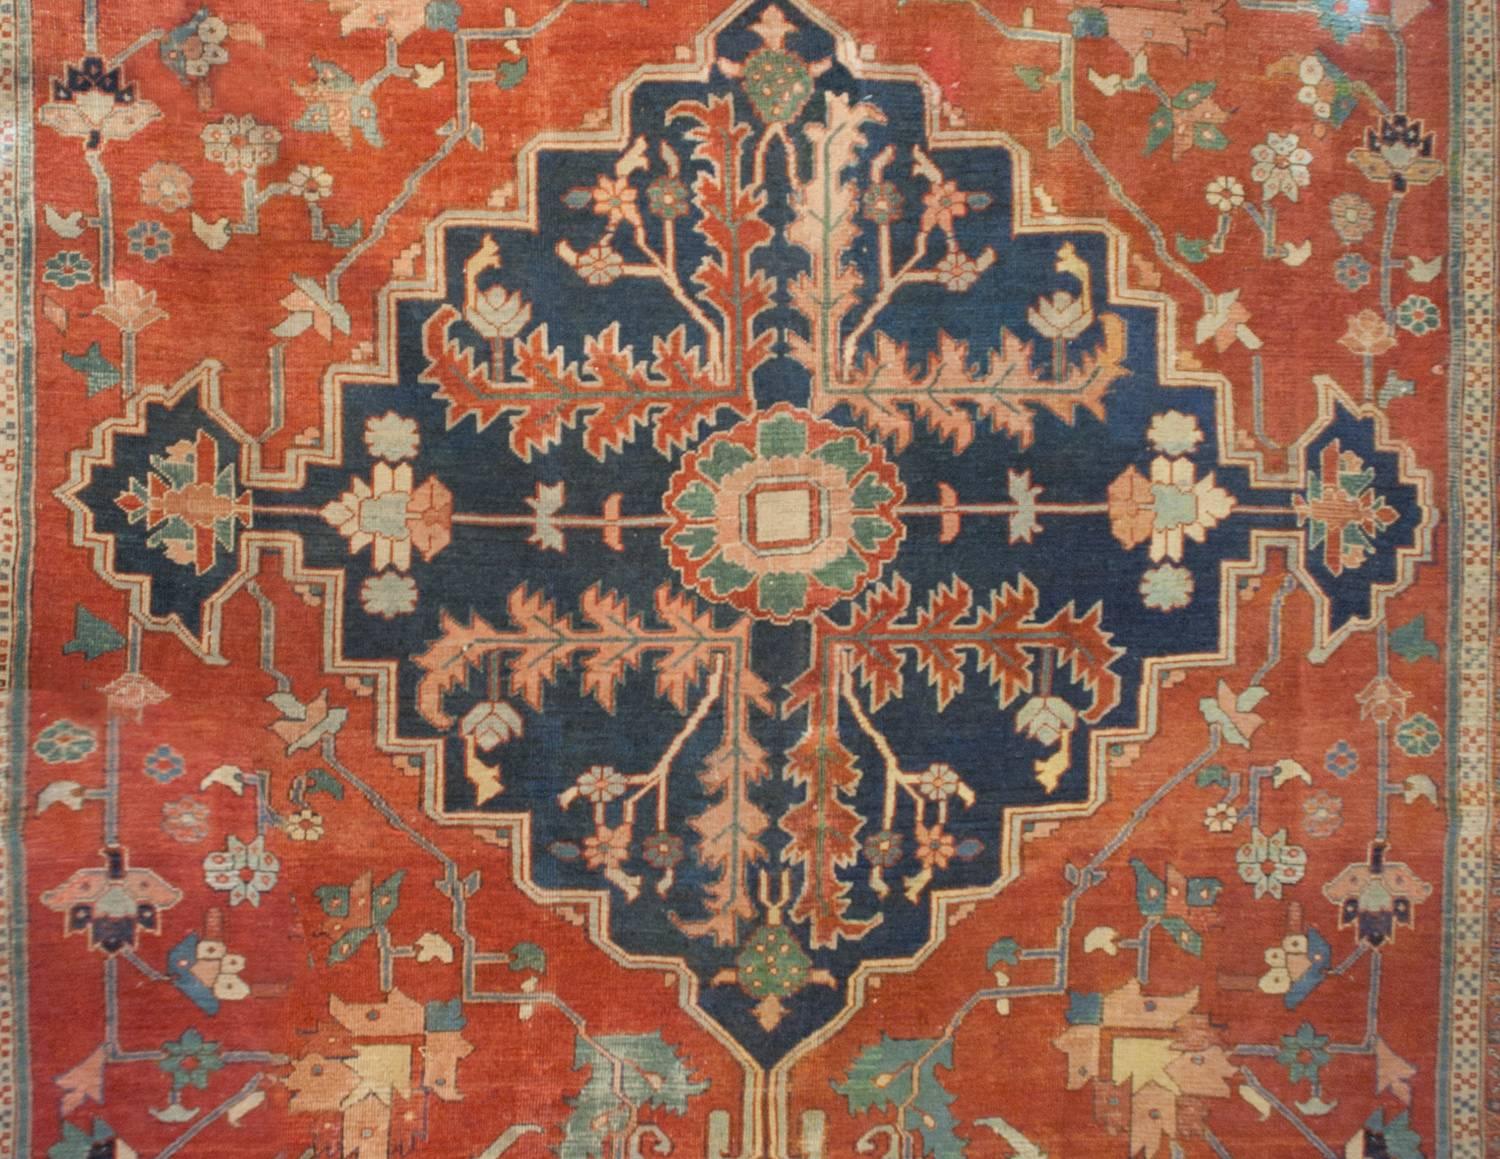 An incredible mid-19th century Persian Serapi rug woven by a highly skilled master weaver! The central medallion is diamond in form with a deep indigo field. In the centre of the field is a large-scale flower with scrolling vines and leaves